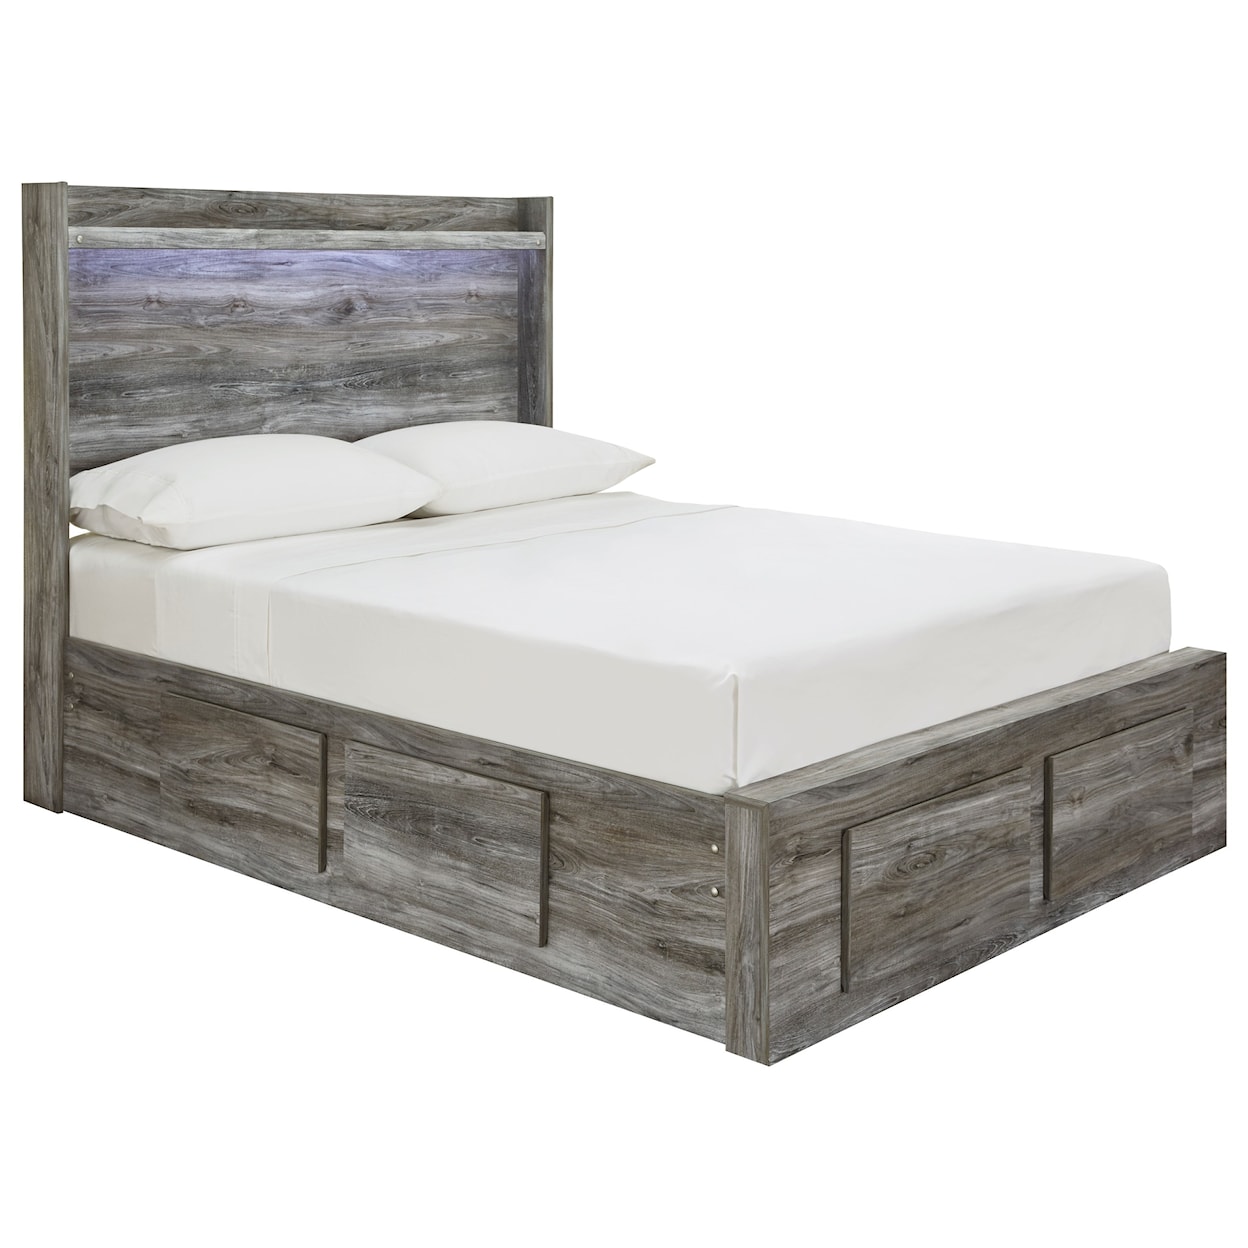 Signature Baylor Full Storage Bed with 6 Drawers